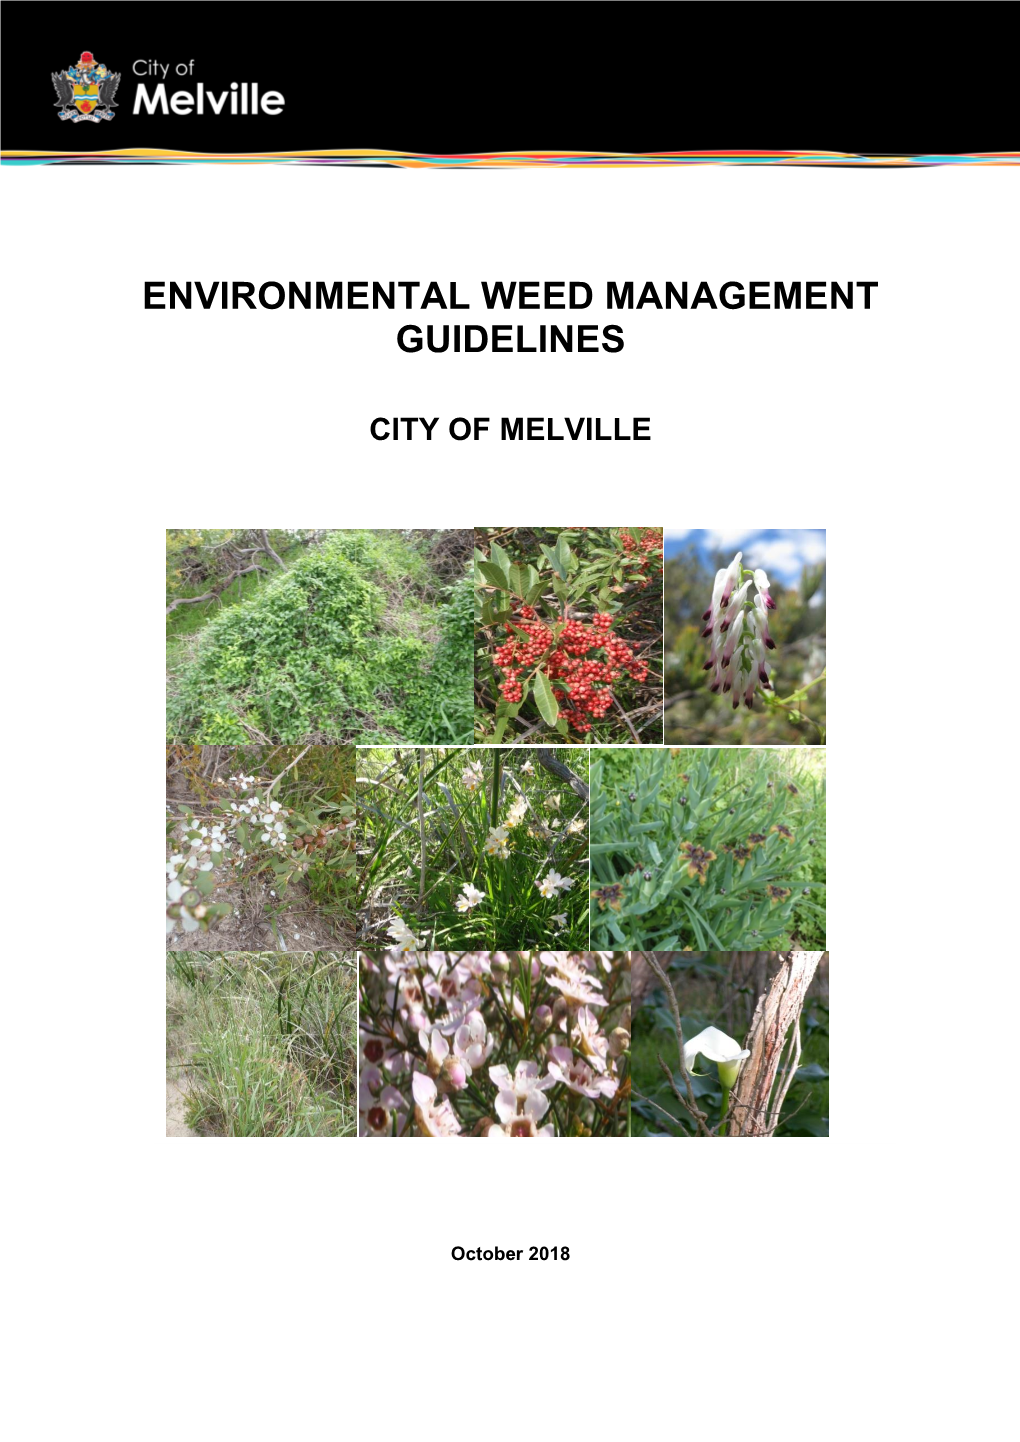 Environmental Weed Management Guidelines